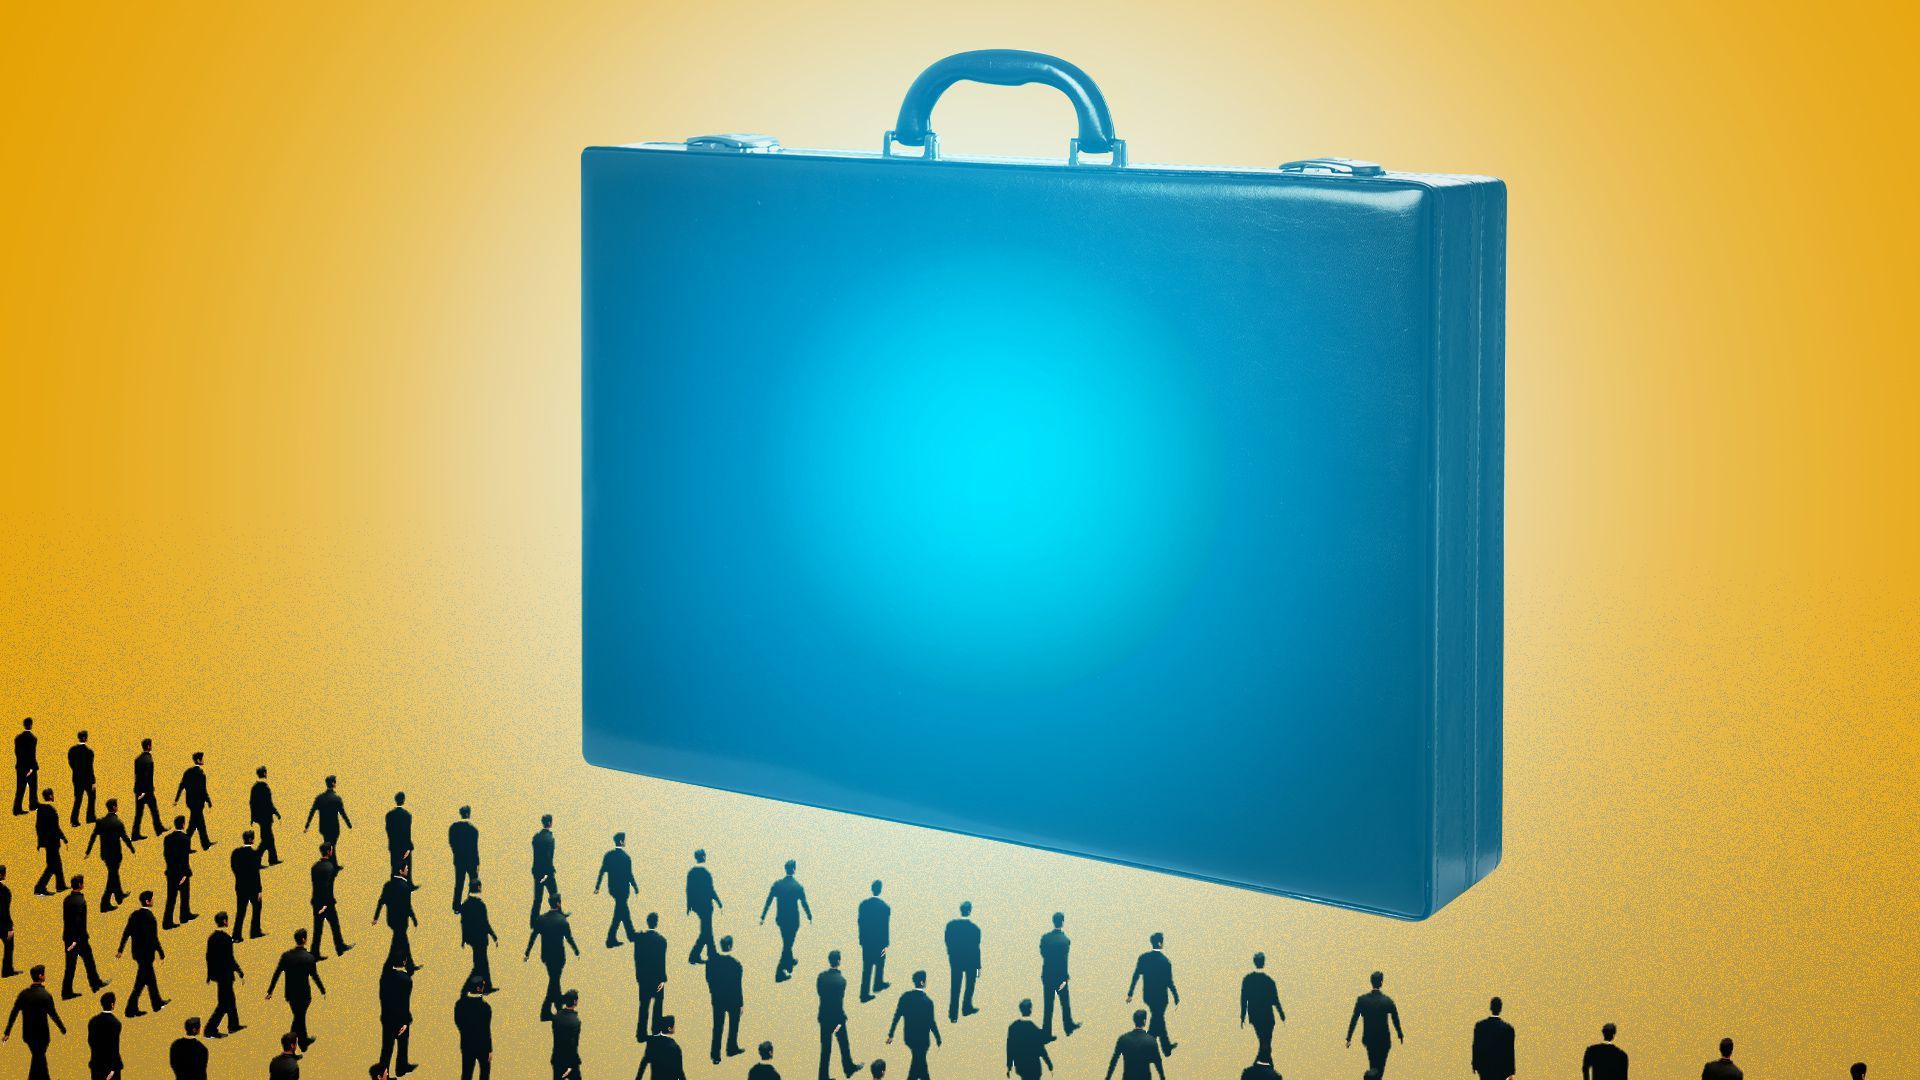 Illustration of a large blue briefcase with lines of smaller human figures in front of it.